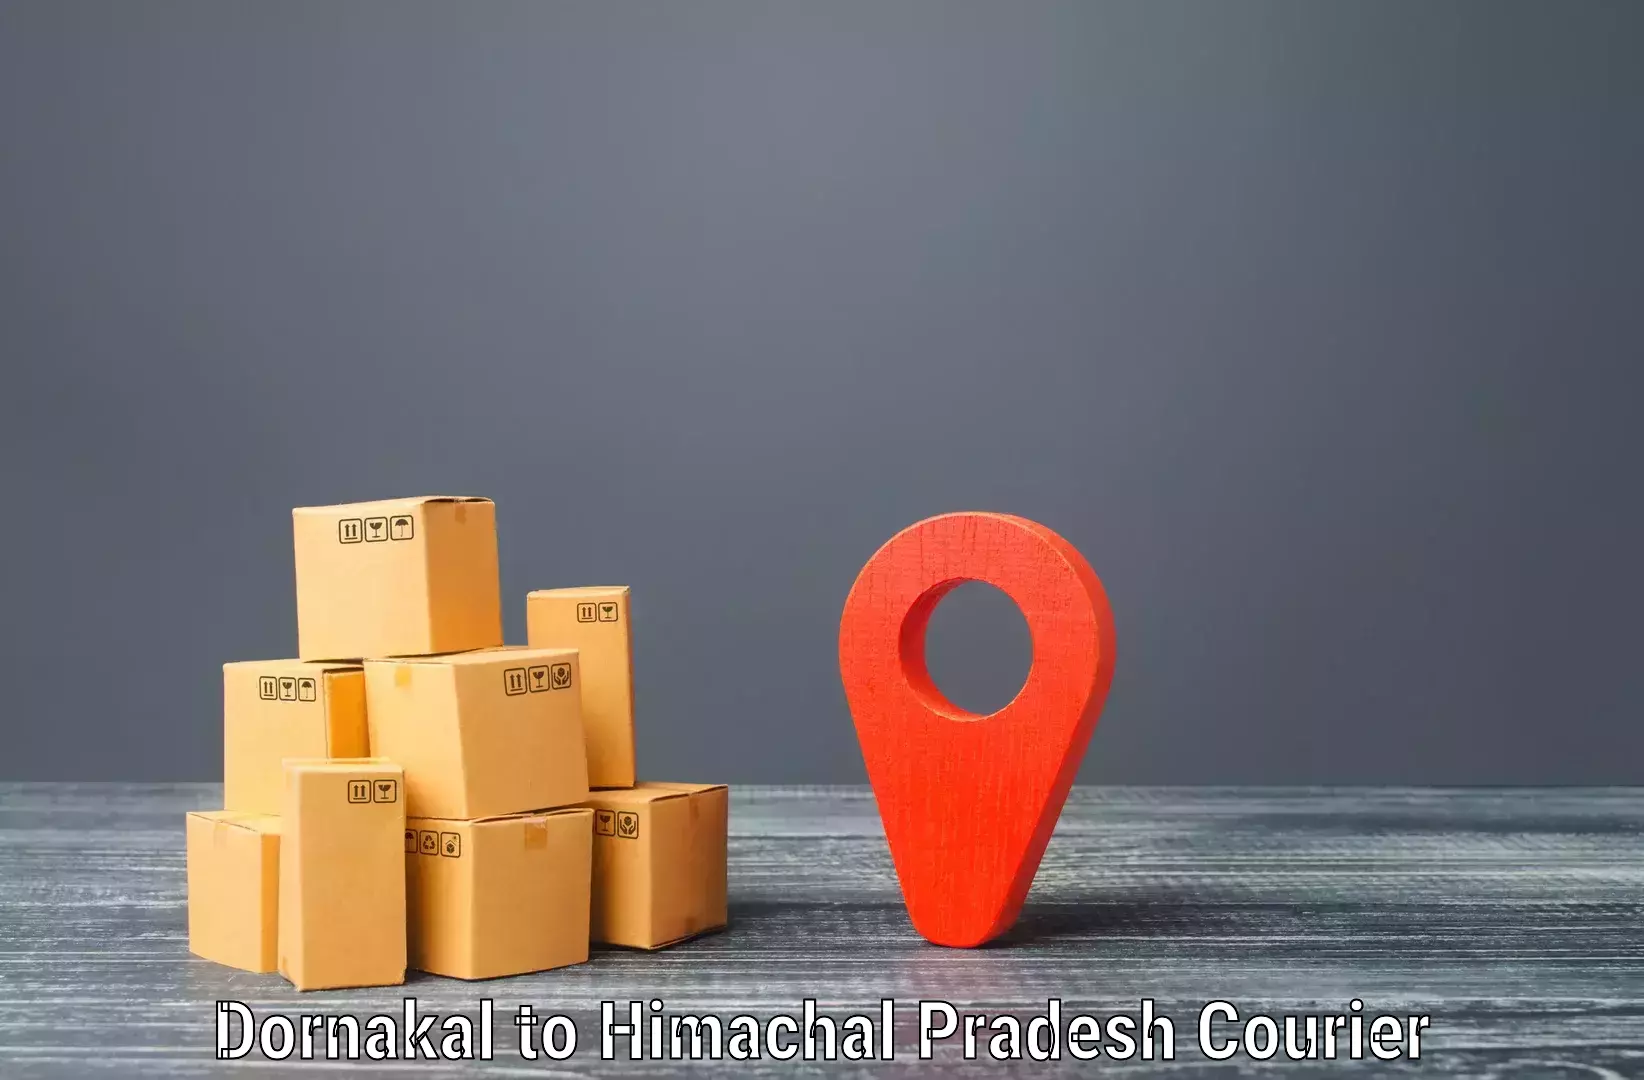 Flexible delivery schedules Dornakal to Ranital